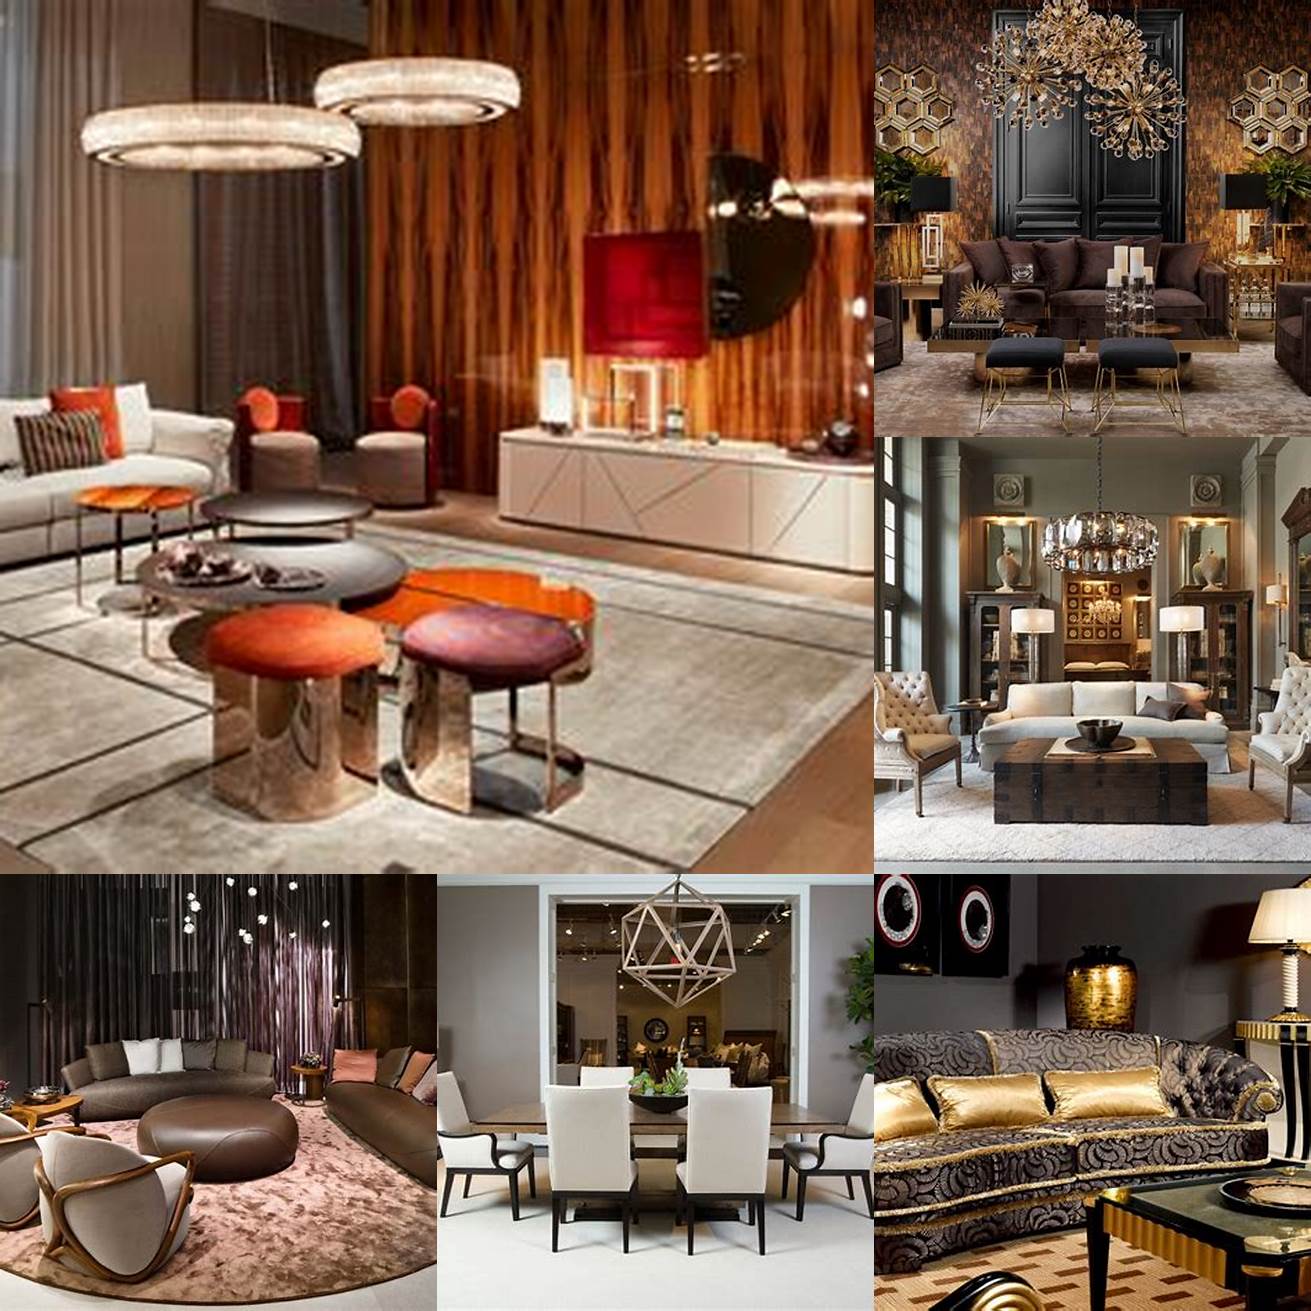 Research brands Do your research on luxury furniture brands before making a purchase Look for brands that have a reputation for quality craftsmanship and customer service